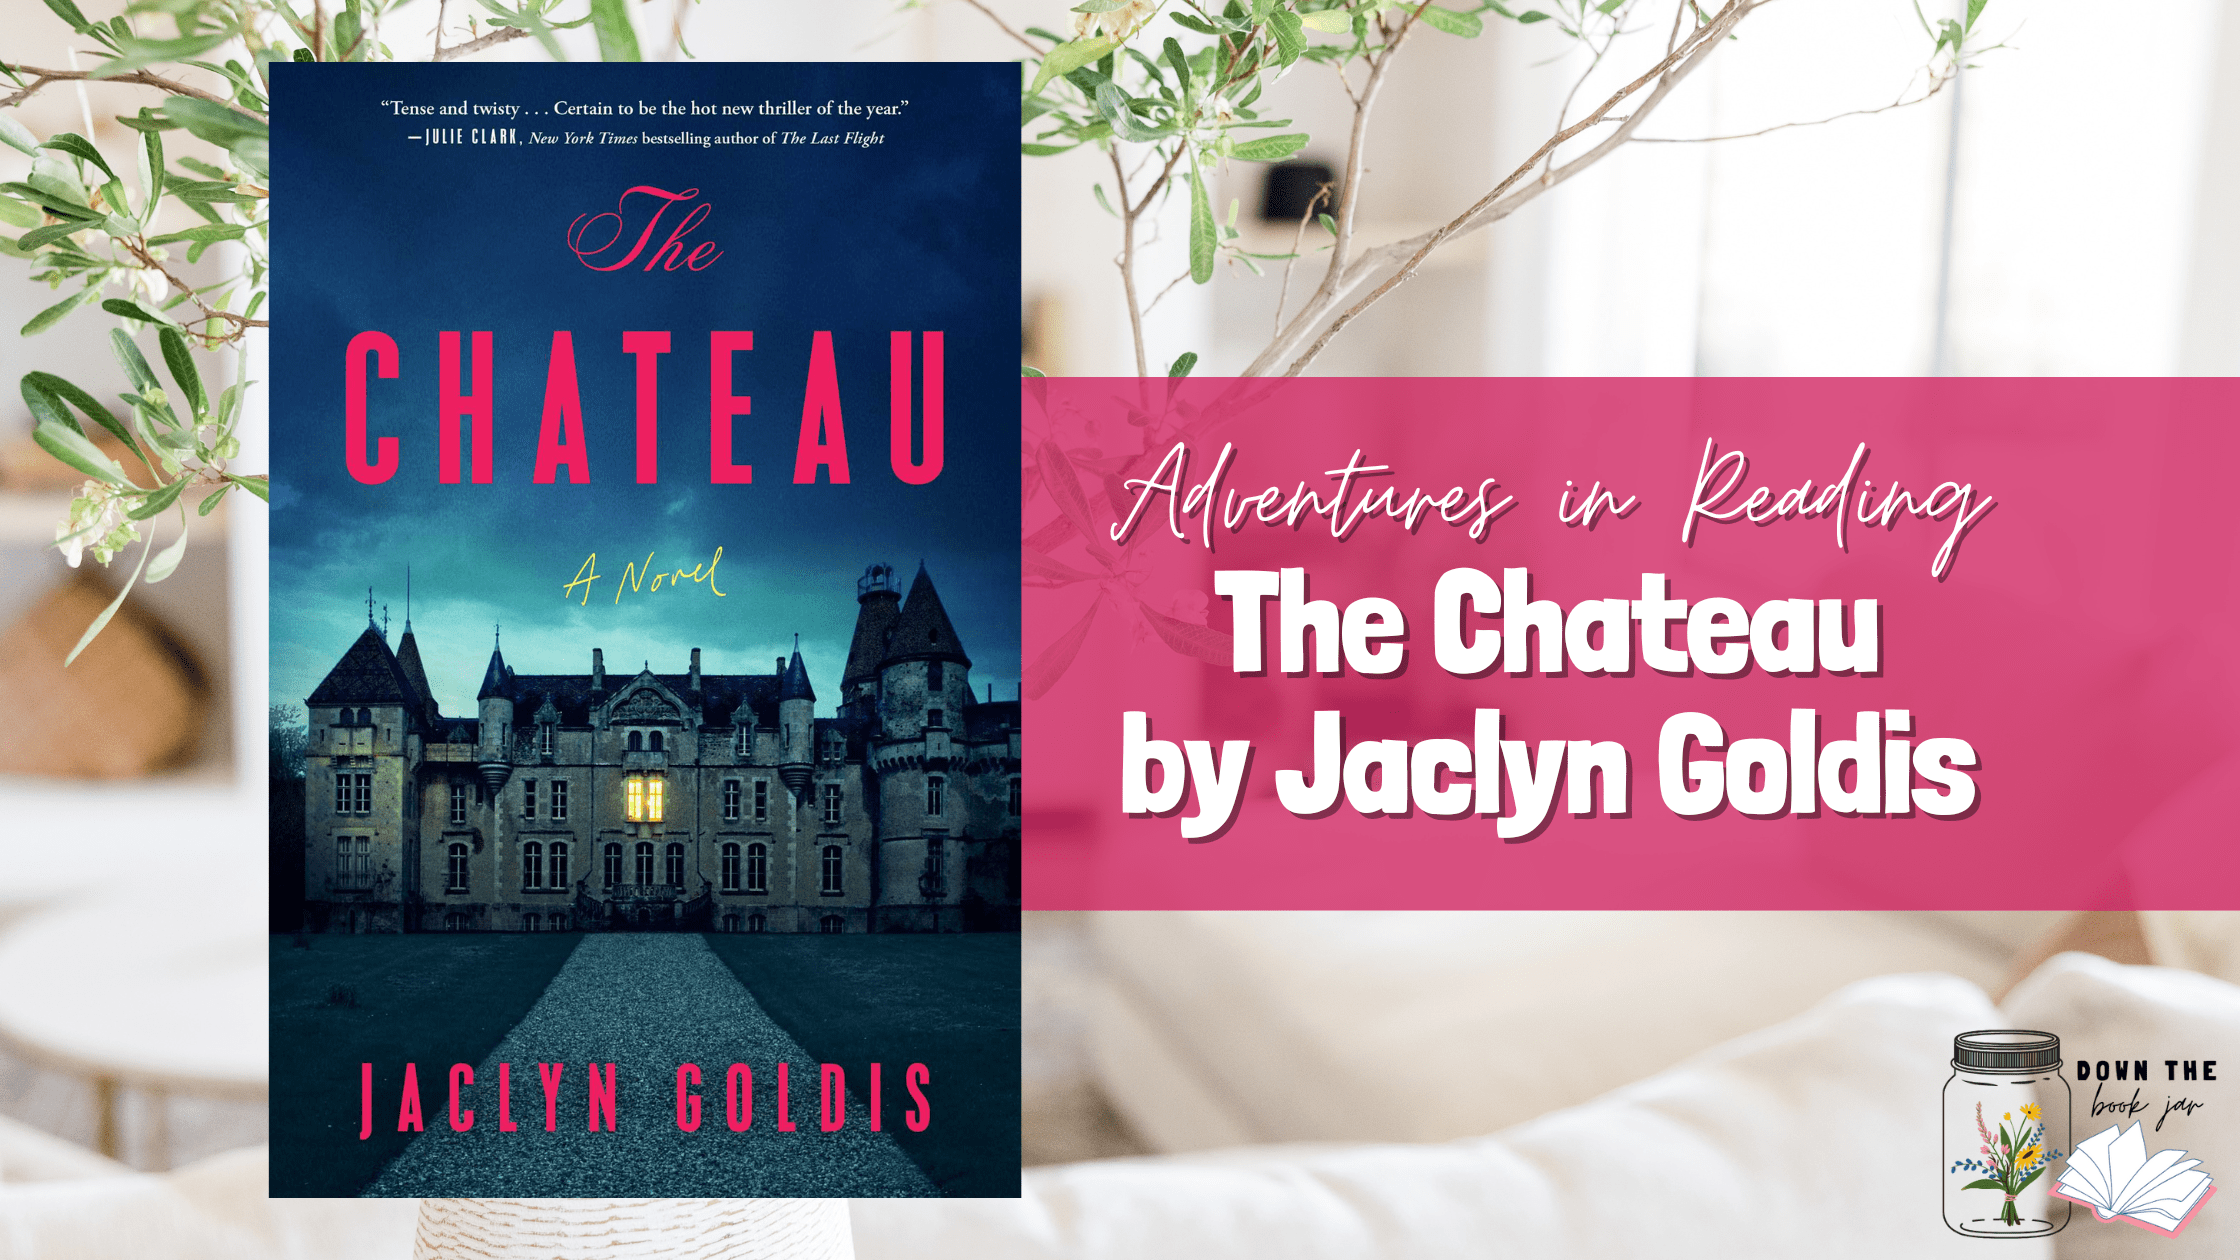 The Chateau by Jaclyn Goldis